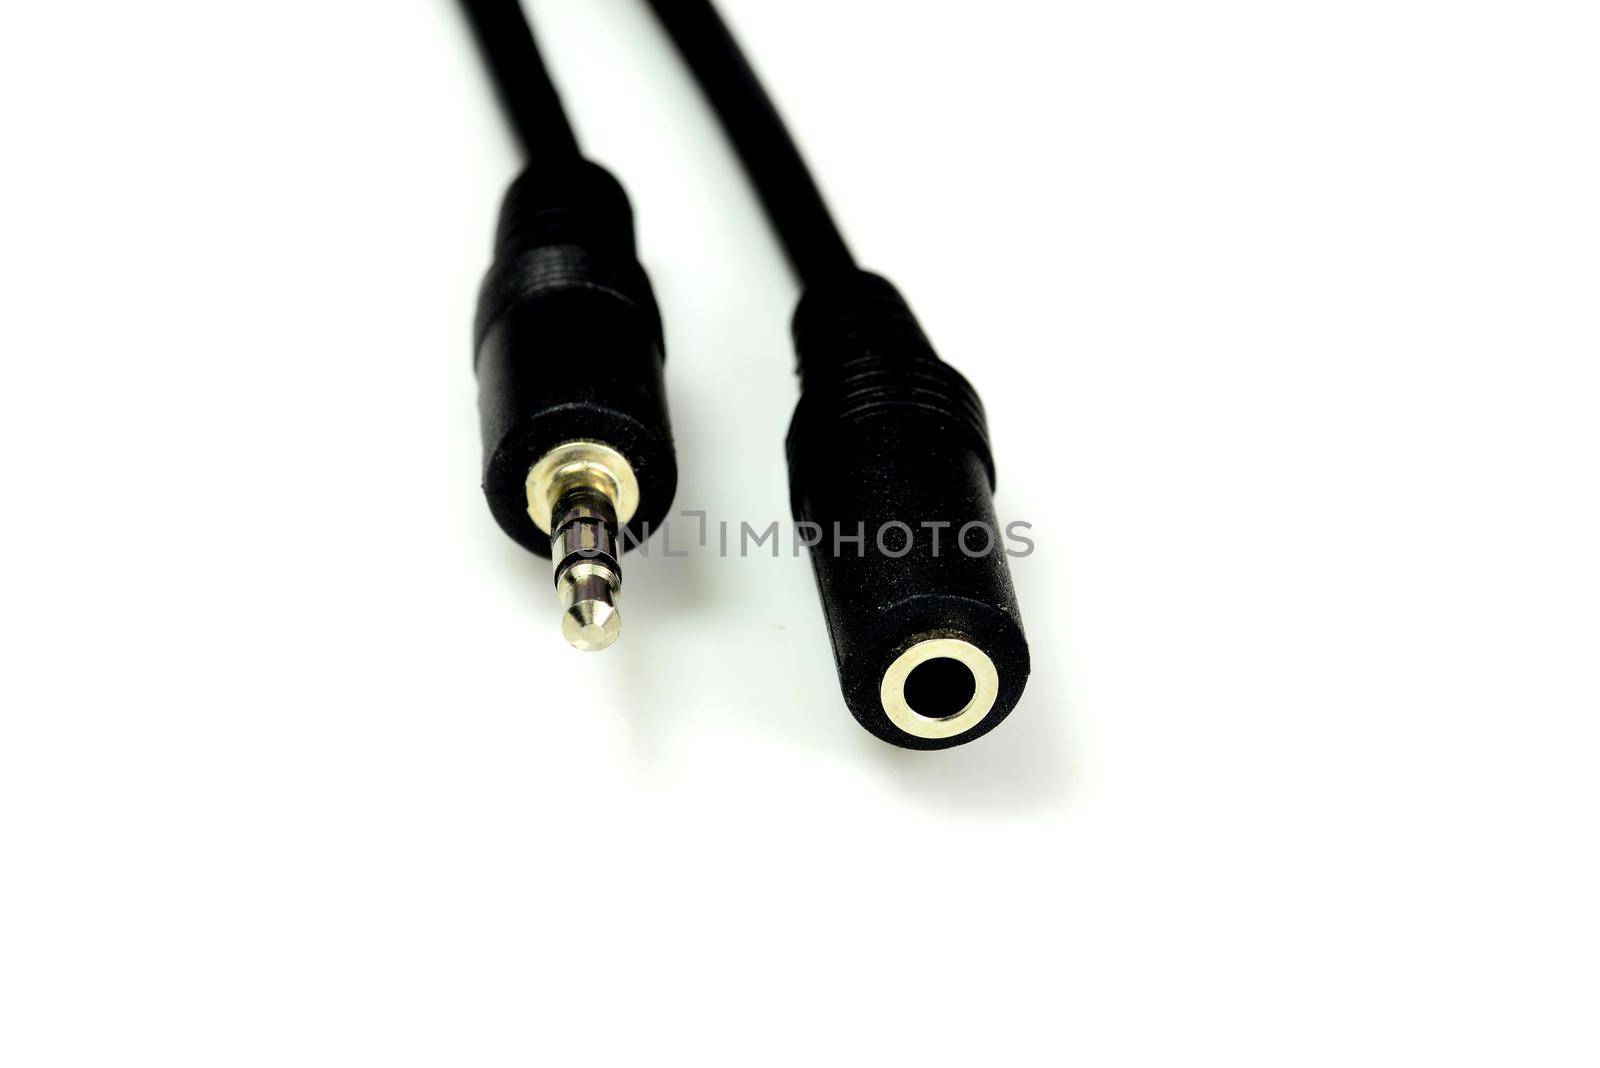 phone jack in a closeup with coupling for extension cable by Jochen